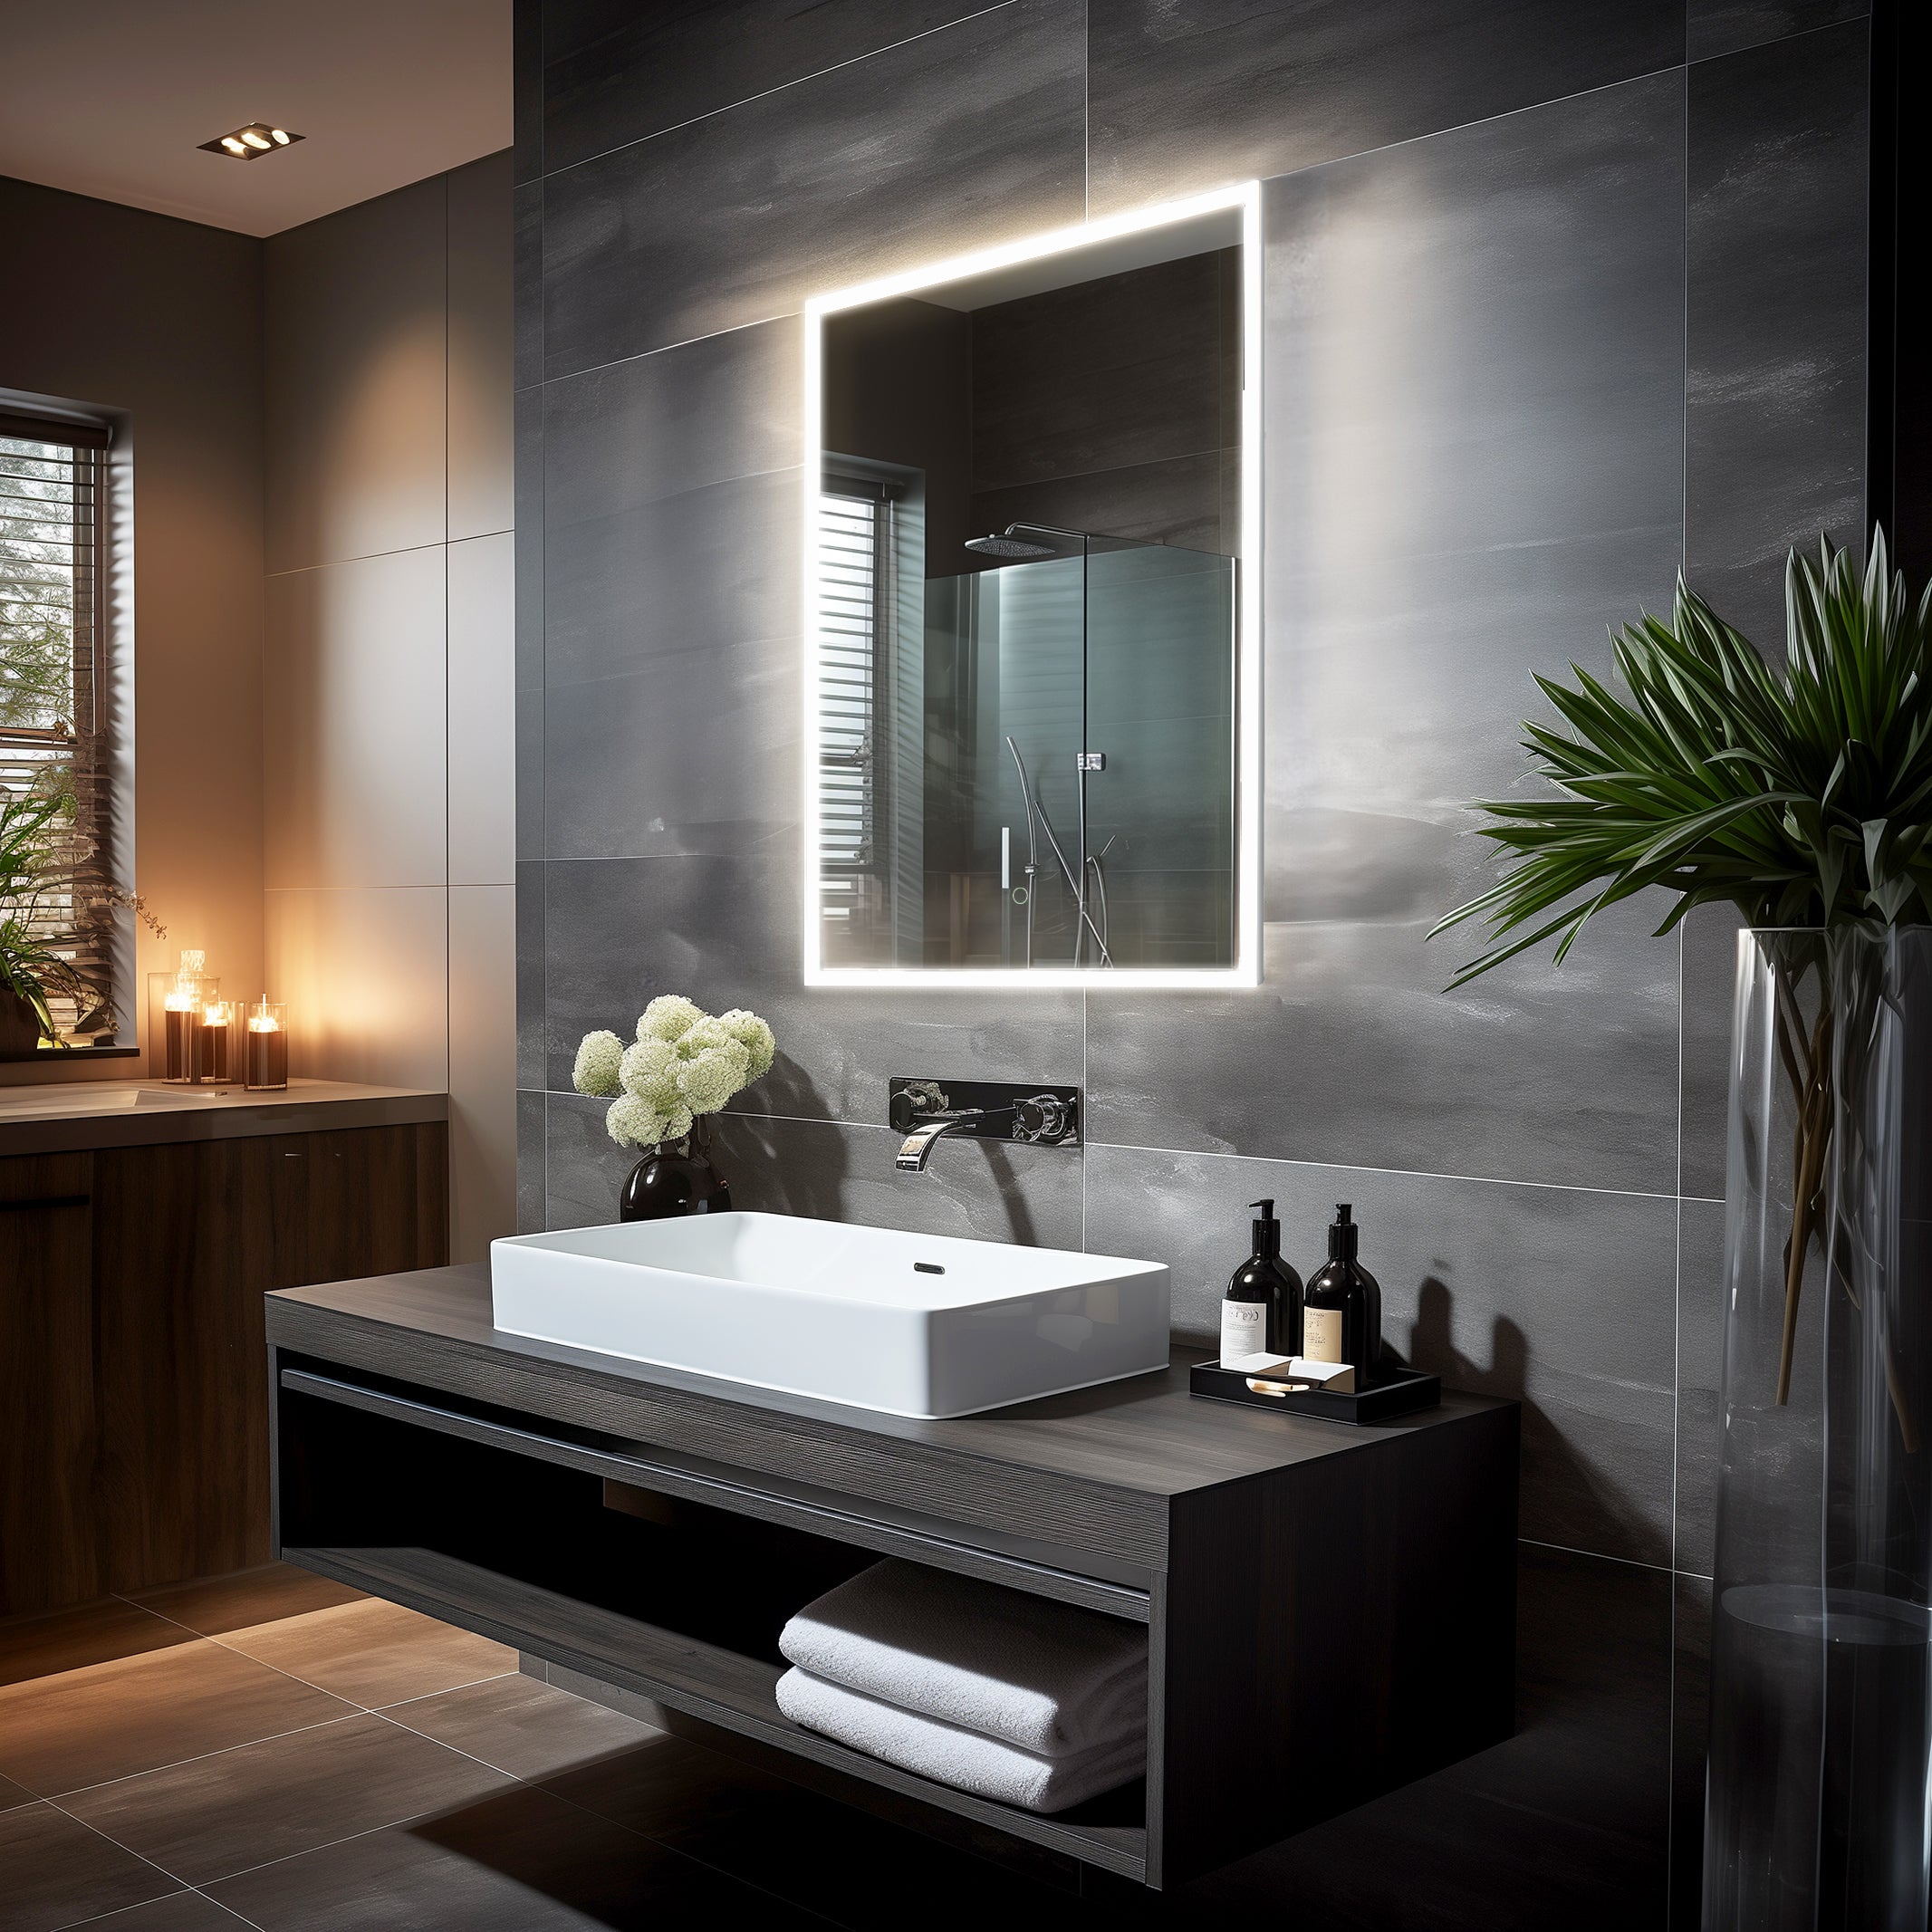 A modern minimalist bathroom interior featuring a sleek vanity with a rectangular basin, backlit mirror, and ambient LED lights, complemented by a serene view from the window.